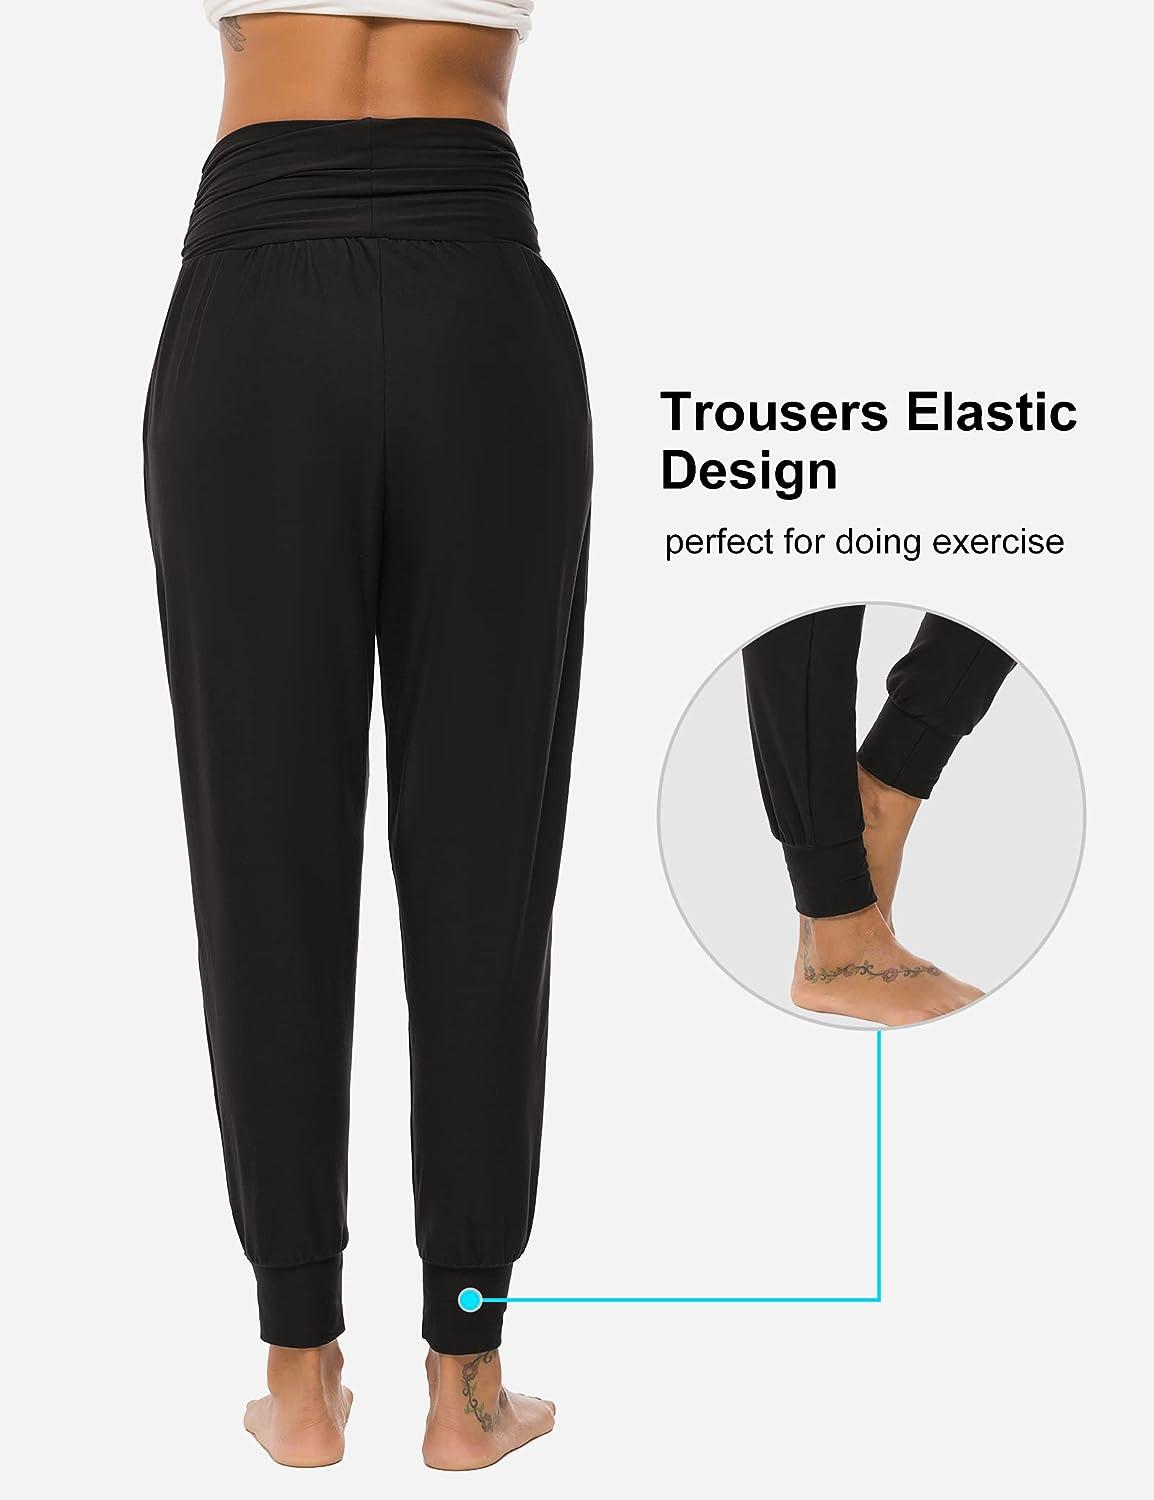 Women's Yoga Pants, Joggers and Trousers